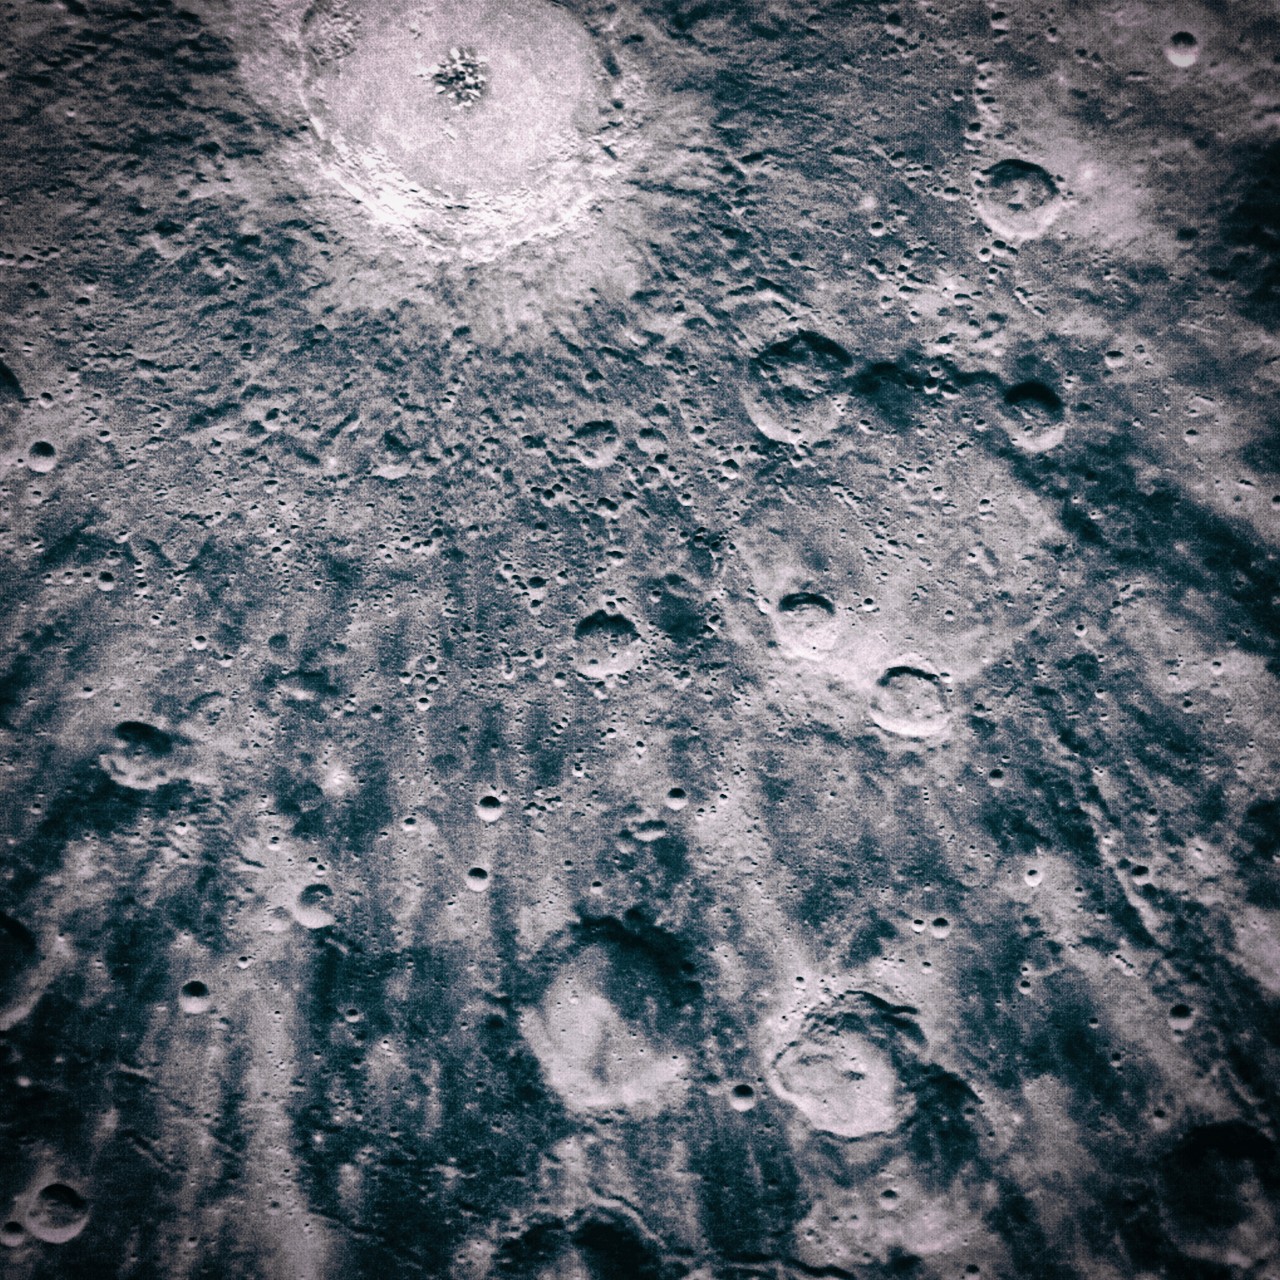 The Lunar surface in the vicinity of Copernicus crater.